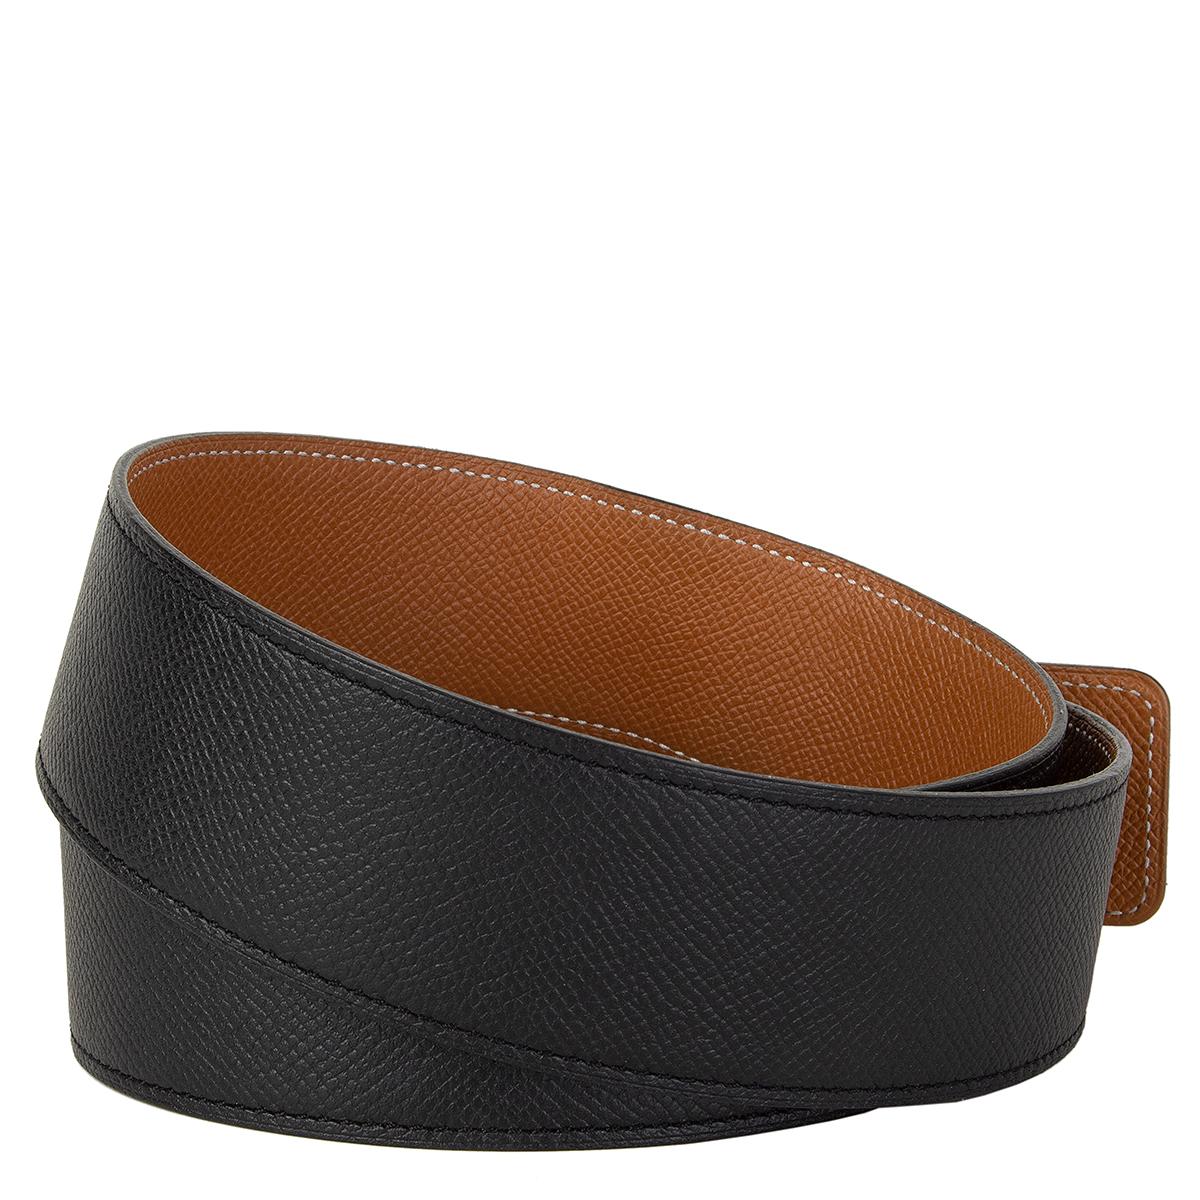 Hermes 'Constance 42mm' reversible belt in black and gold (camel) Veau Epsom leather with palladium and black lizard buckle.  Rare out of production belt. Has been worn and in excellent condition.

Tag Size 85
Width 4.2cm (1.6in)
Fits 82cm (32in) to